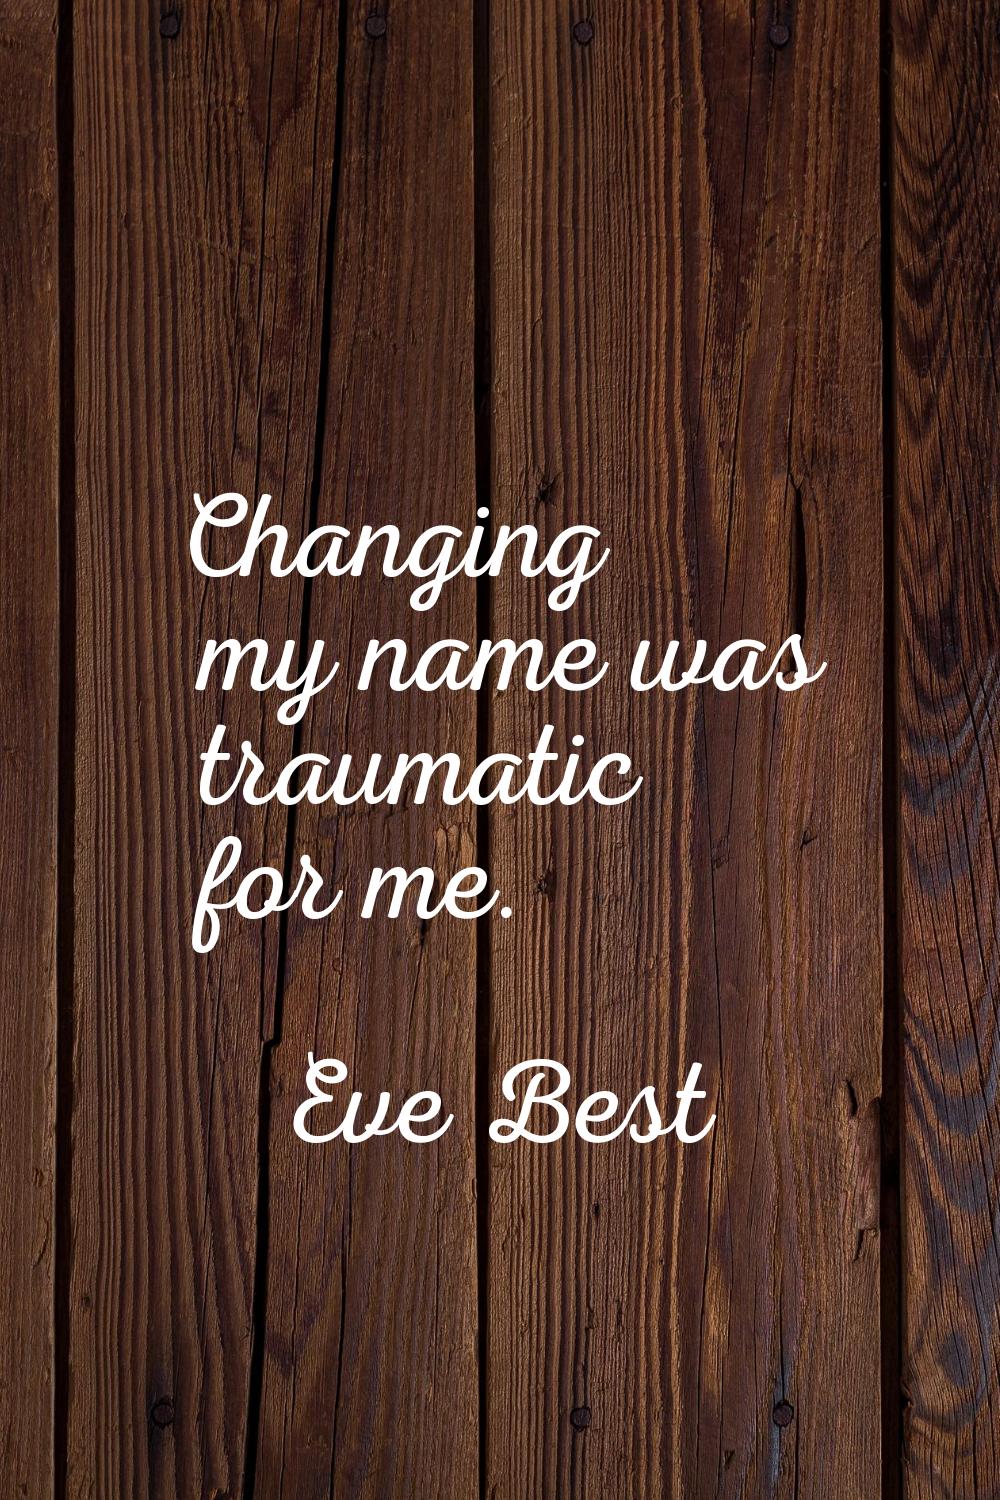 Changing my name was traumatic for me.